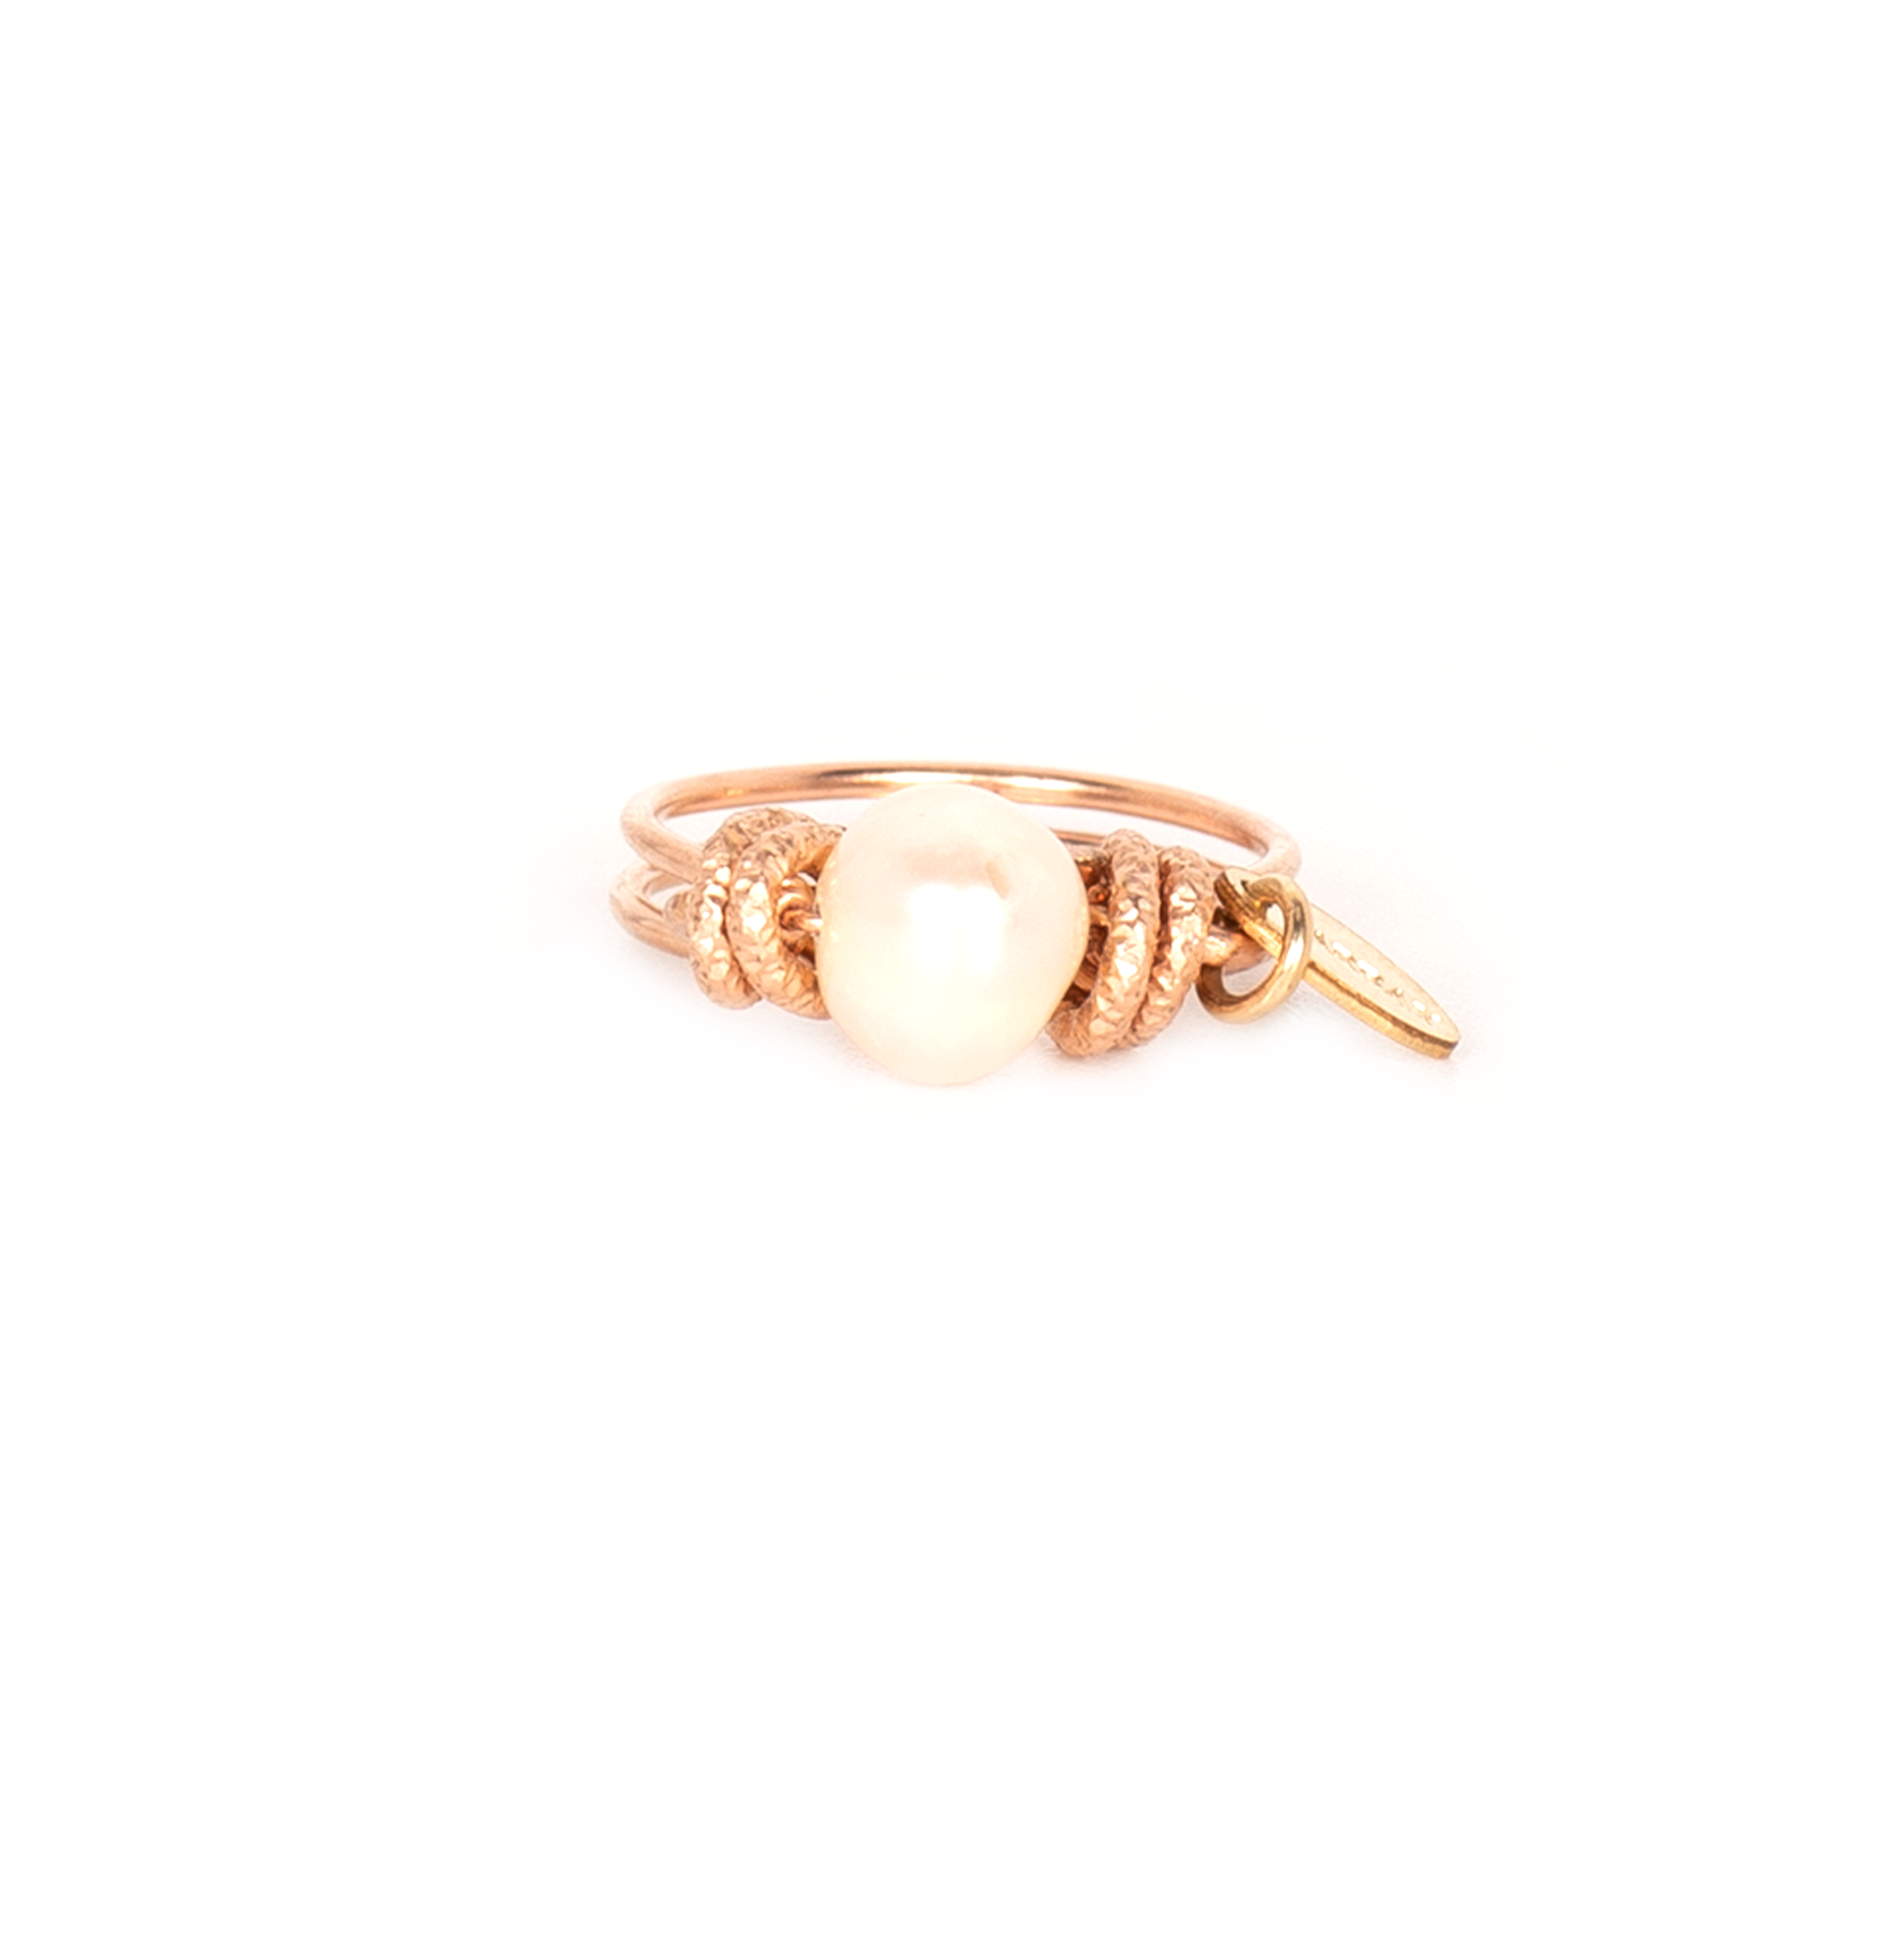 Solitaire Ring #1 (7mm) - Salmon Pearl & Rose Gold Rings TARBAY   